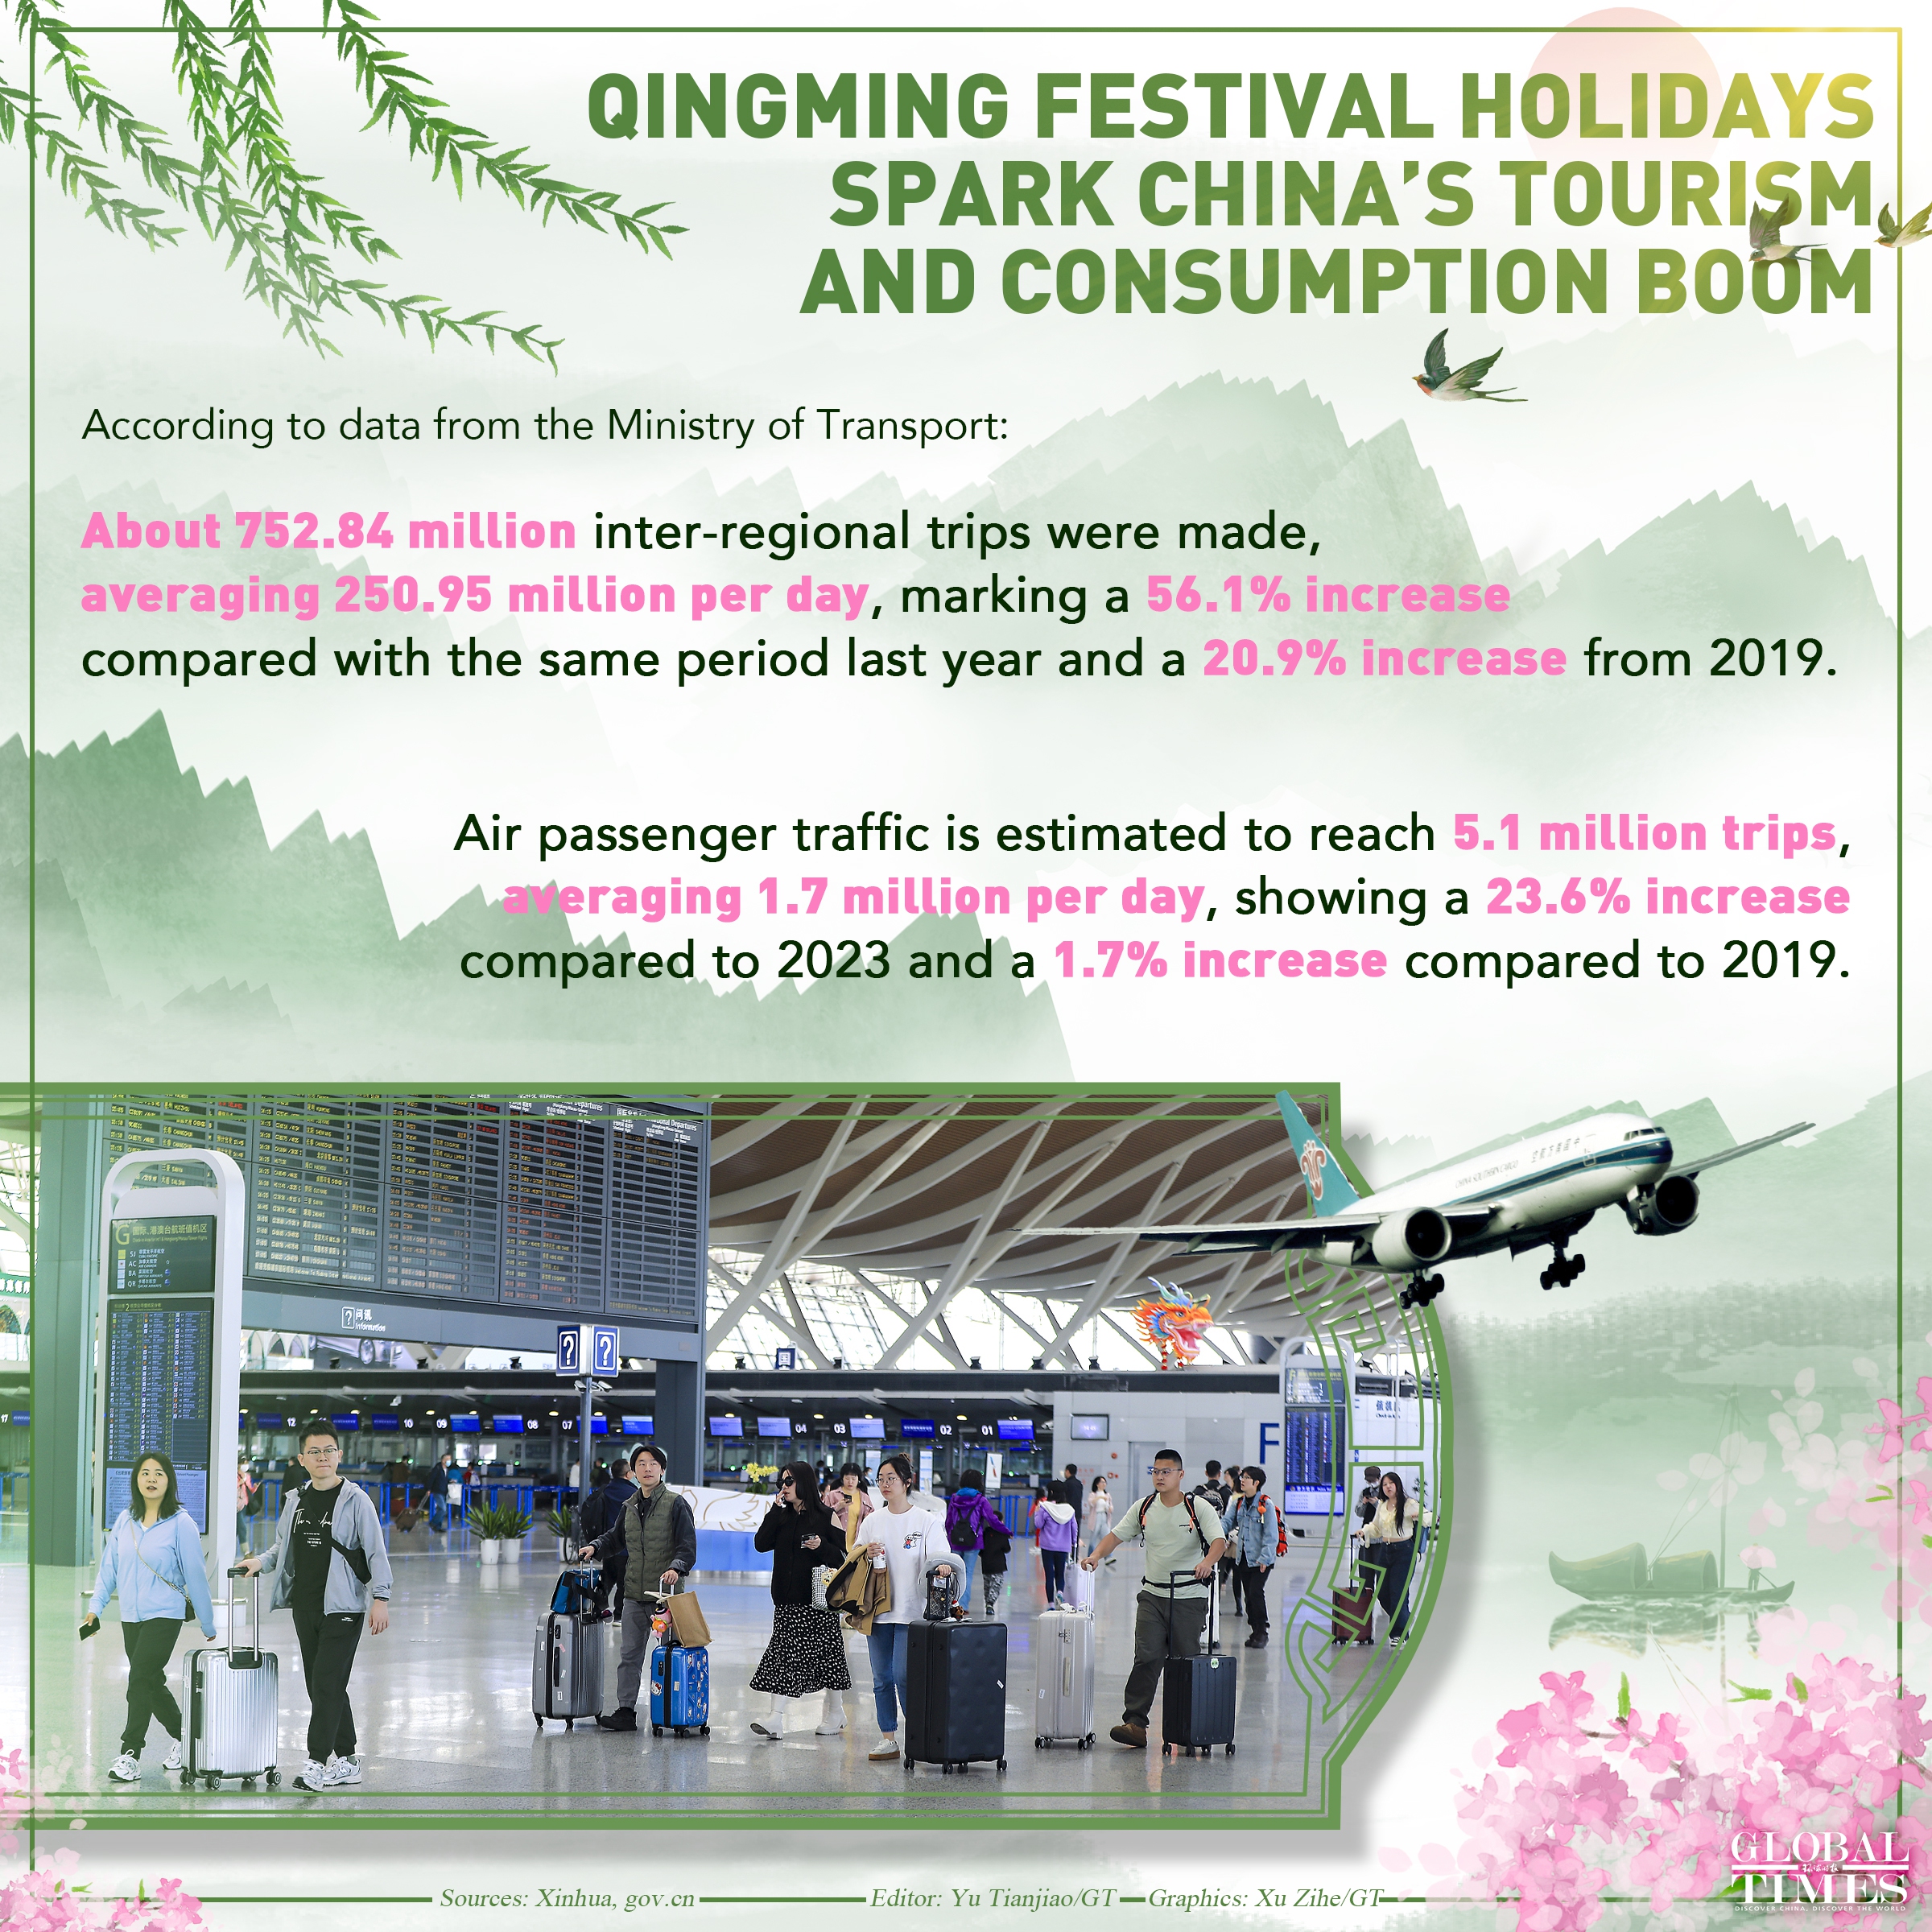 China saw 119 million domestic tourist trips during the just-ended Qingming Festival holidays (April 4-6), an increase of 11.5% from the same period in 2019. The better-than-expected performance underscored the strong vitality and potential of Chinese economy.